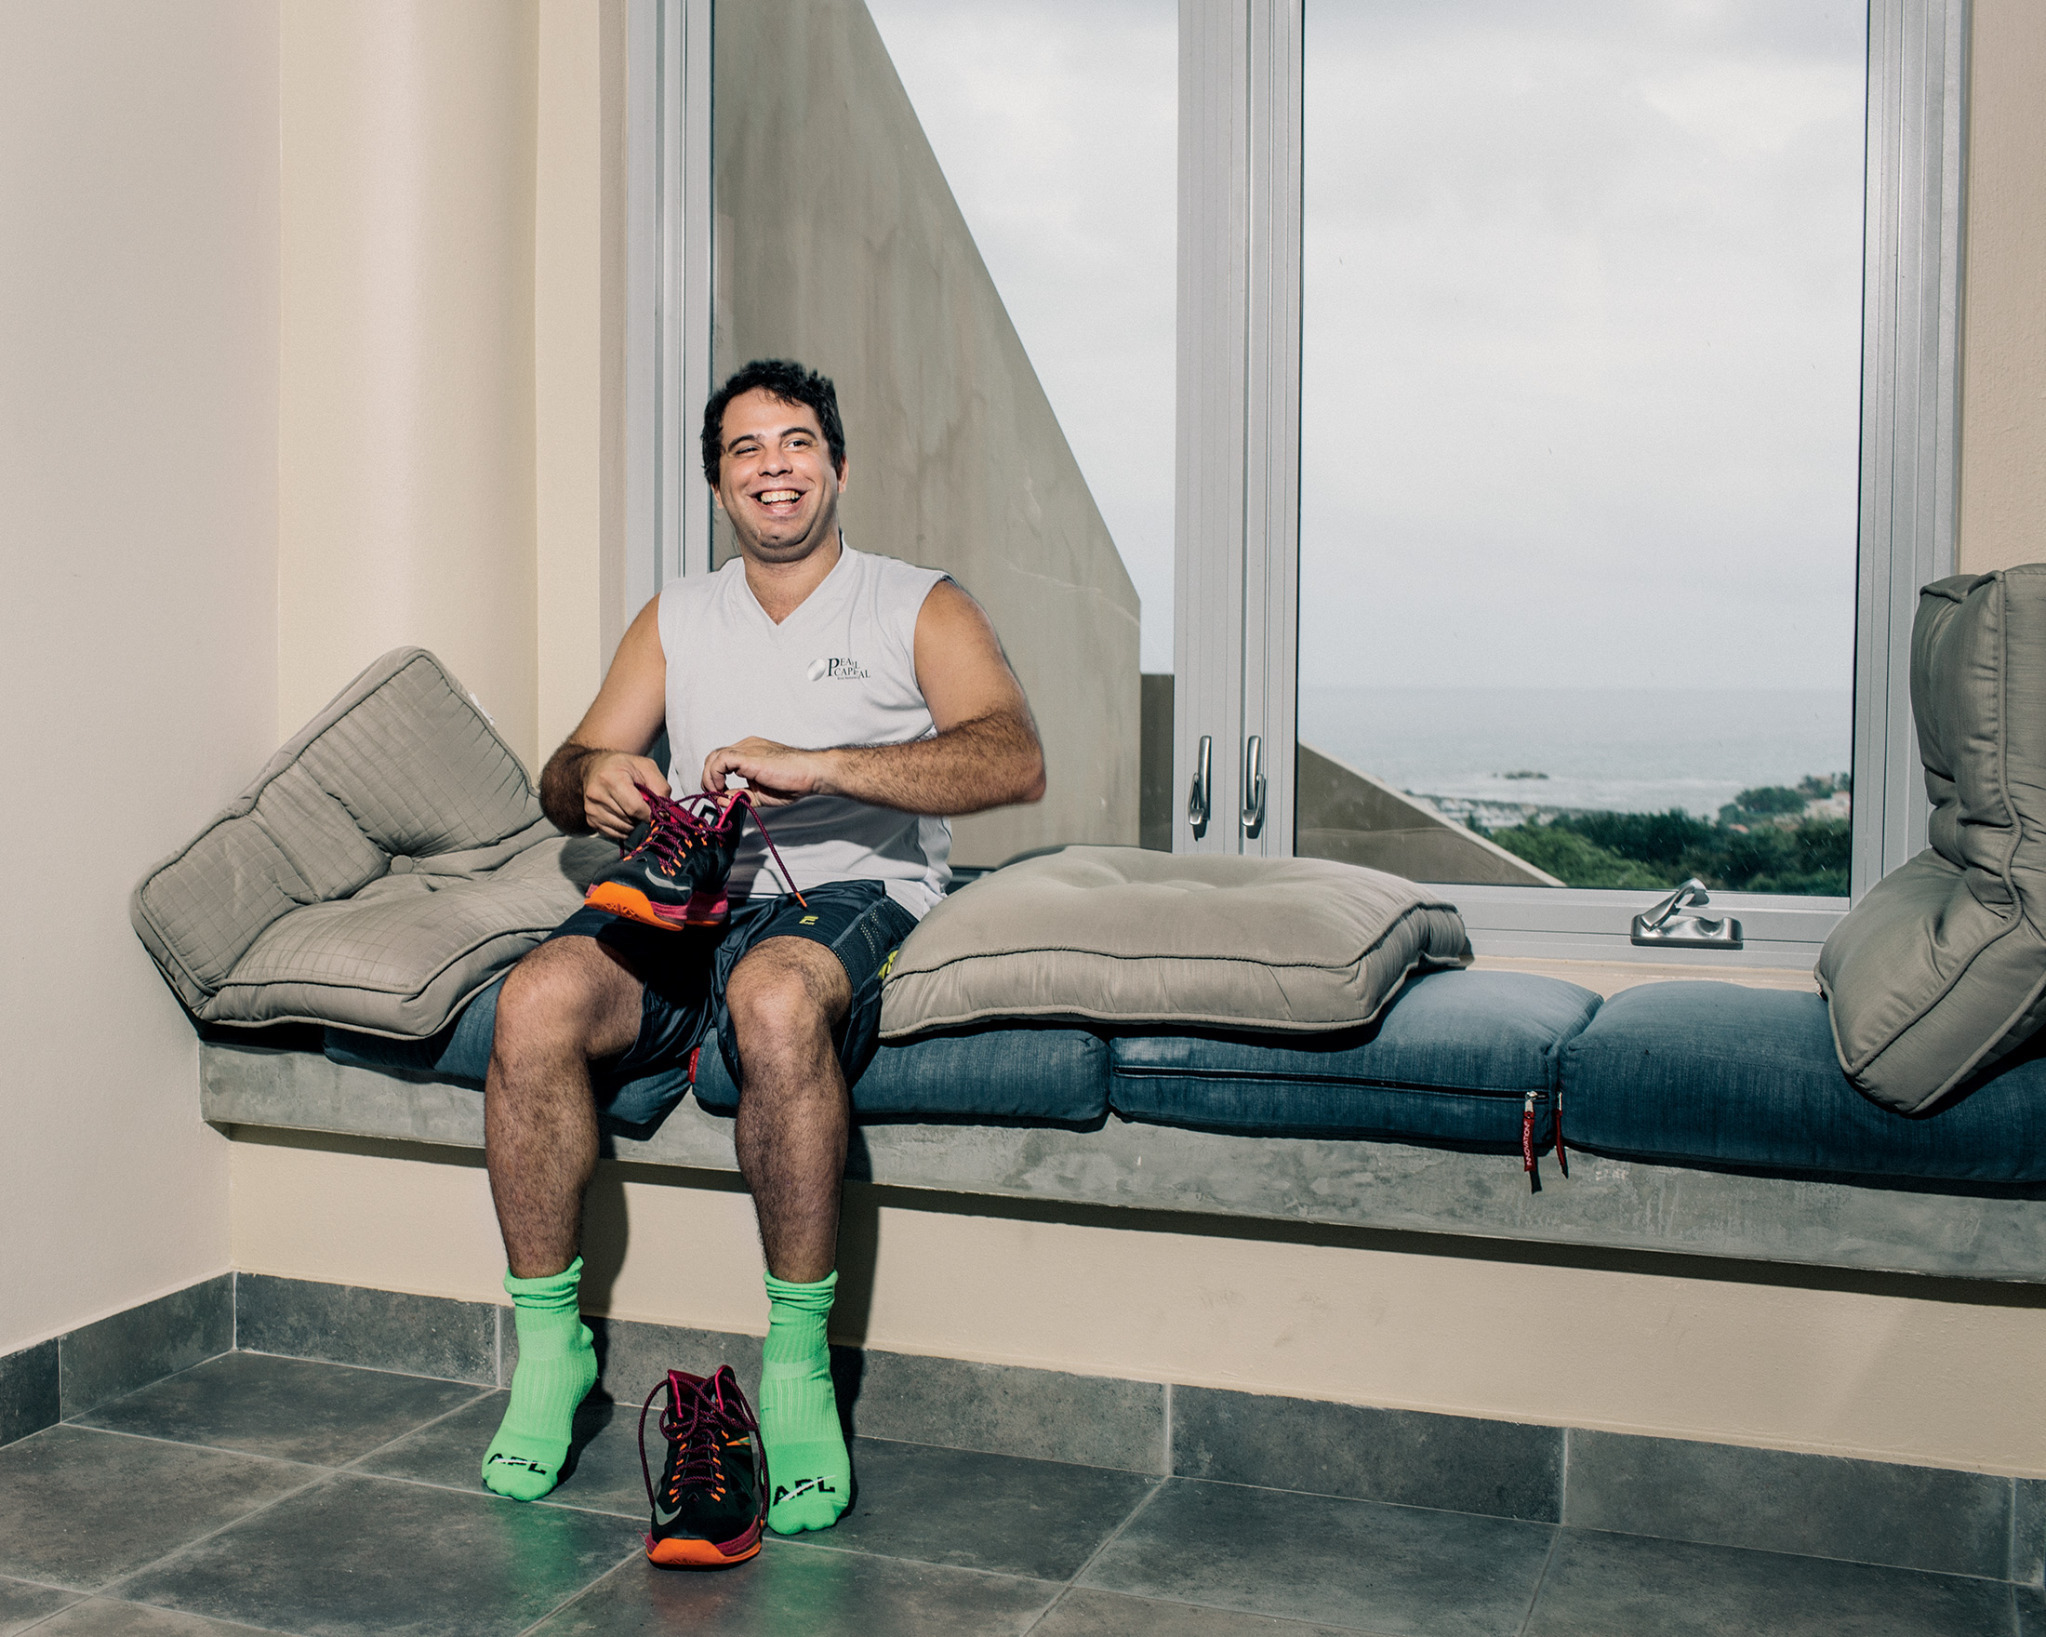 MeUndies Secures $40 Million Investment From Provenance - Los